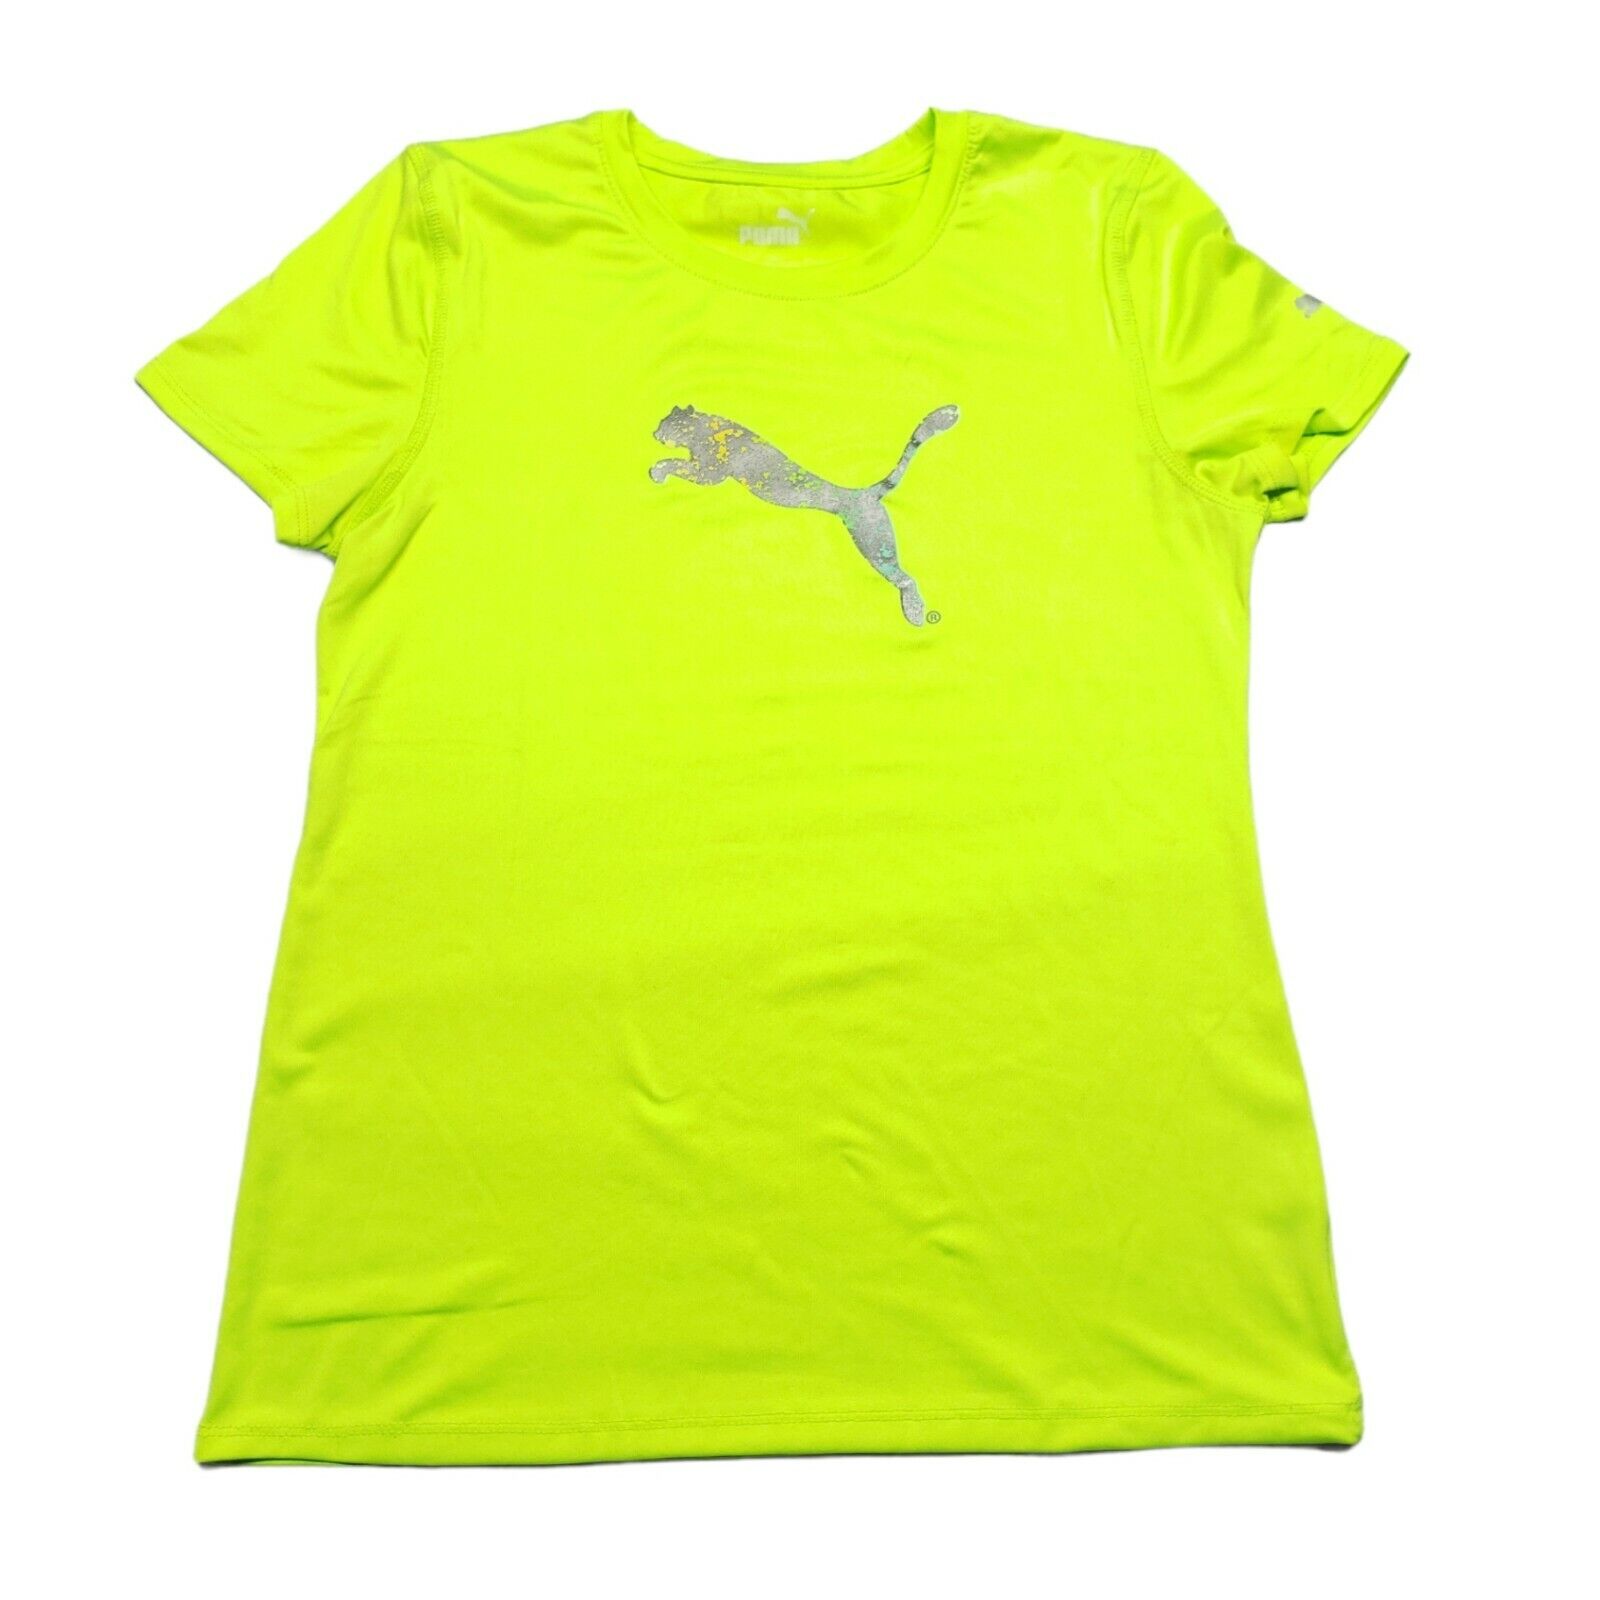 Puma Girls Dry Cell Round Neck Short Sleeve Pullover Bright Yellow Shirt Size XL